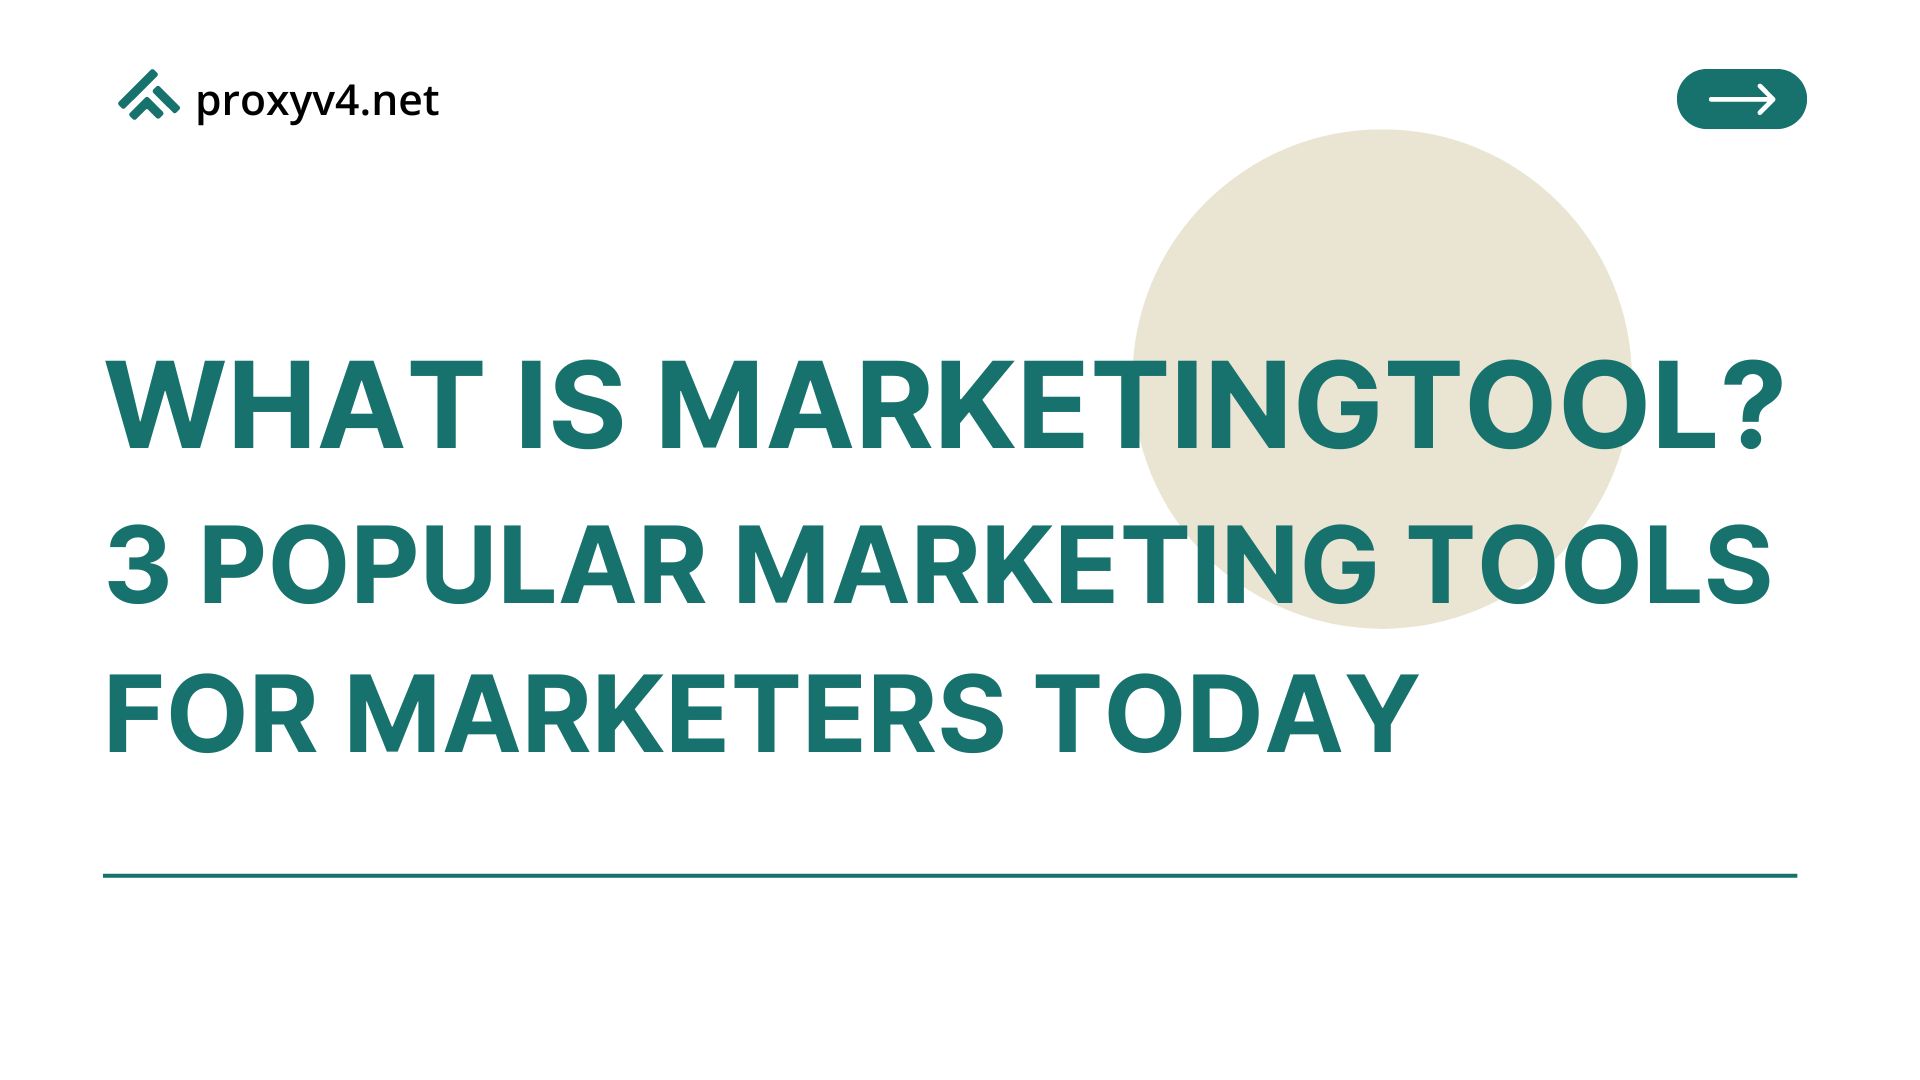 What is Marketingtool? 3 popular marketing tools for marketers today